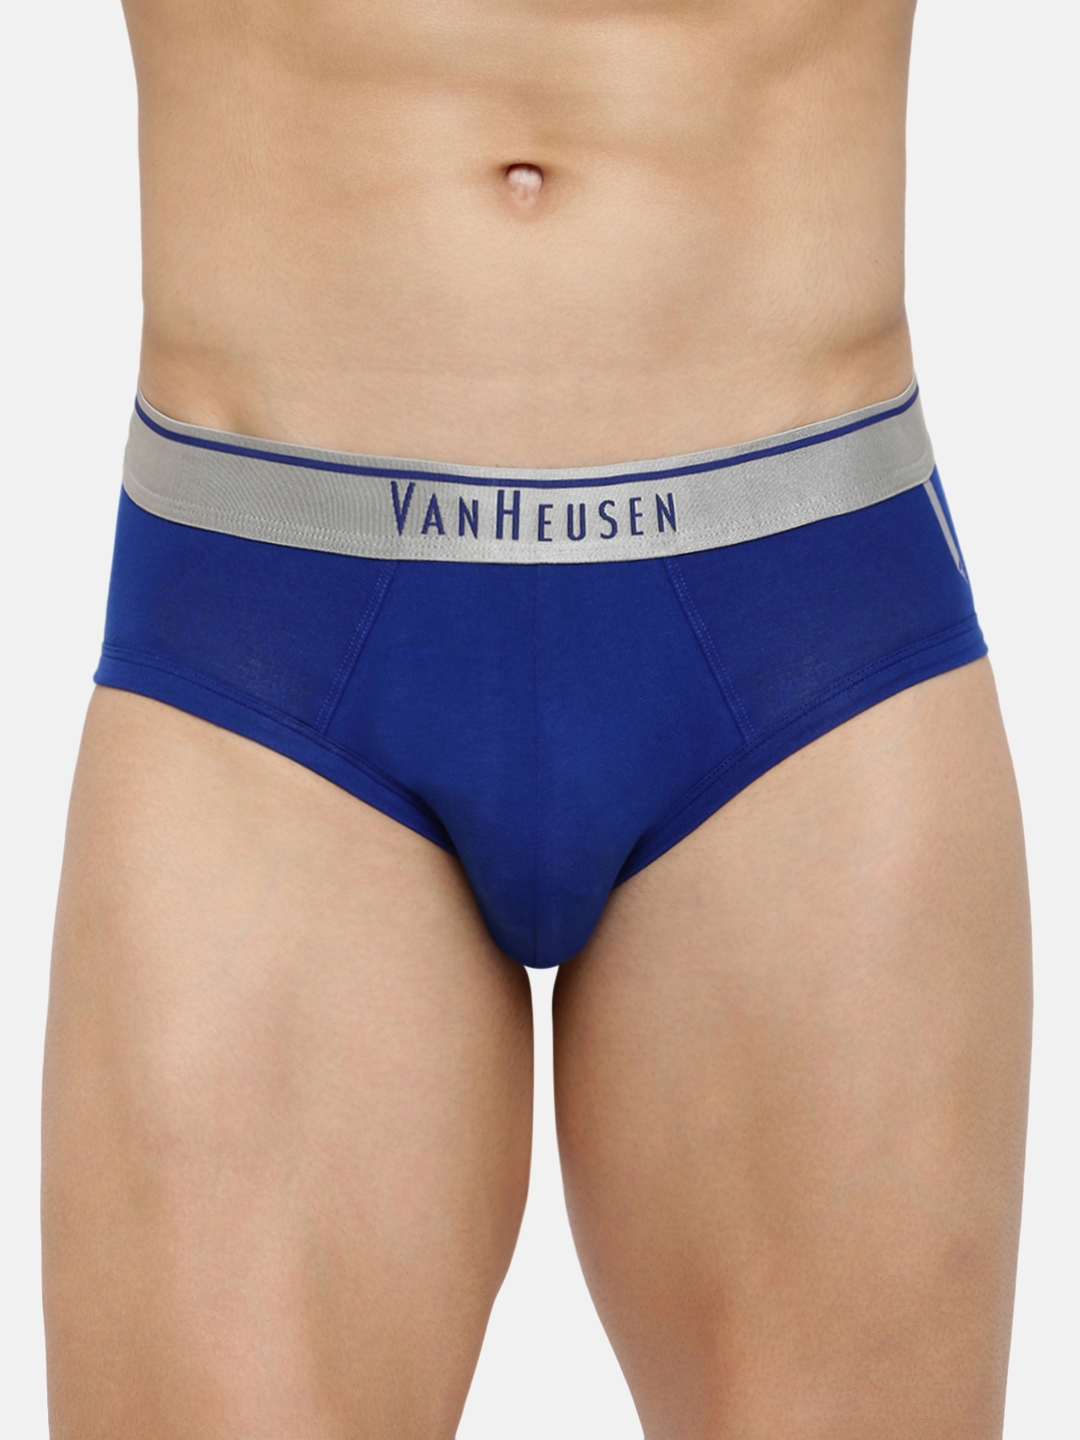 Van Heusen Innerwear Briefs, Men Anti Bacterial Cotton Briefs - Colour  Fresh And Quick Dry - Pack Of 3 for Innerwear at Vanheuse